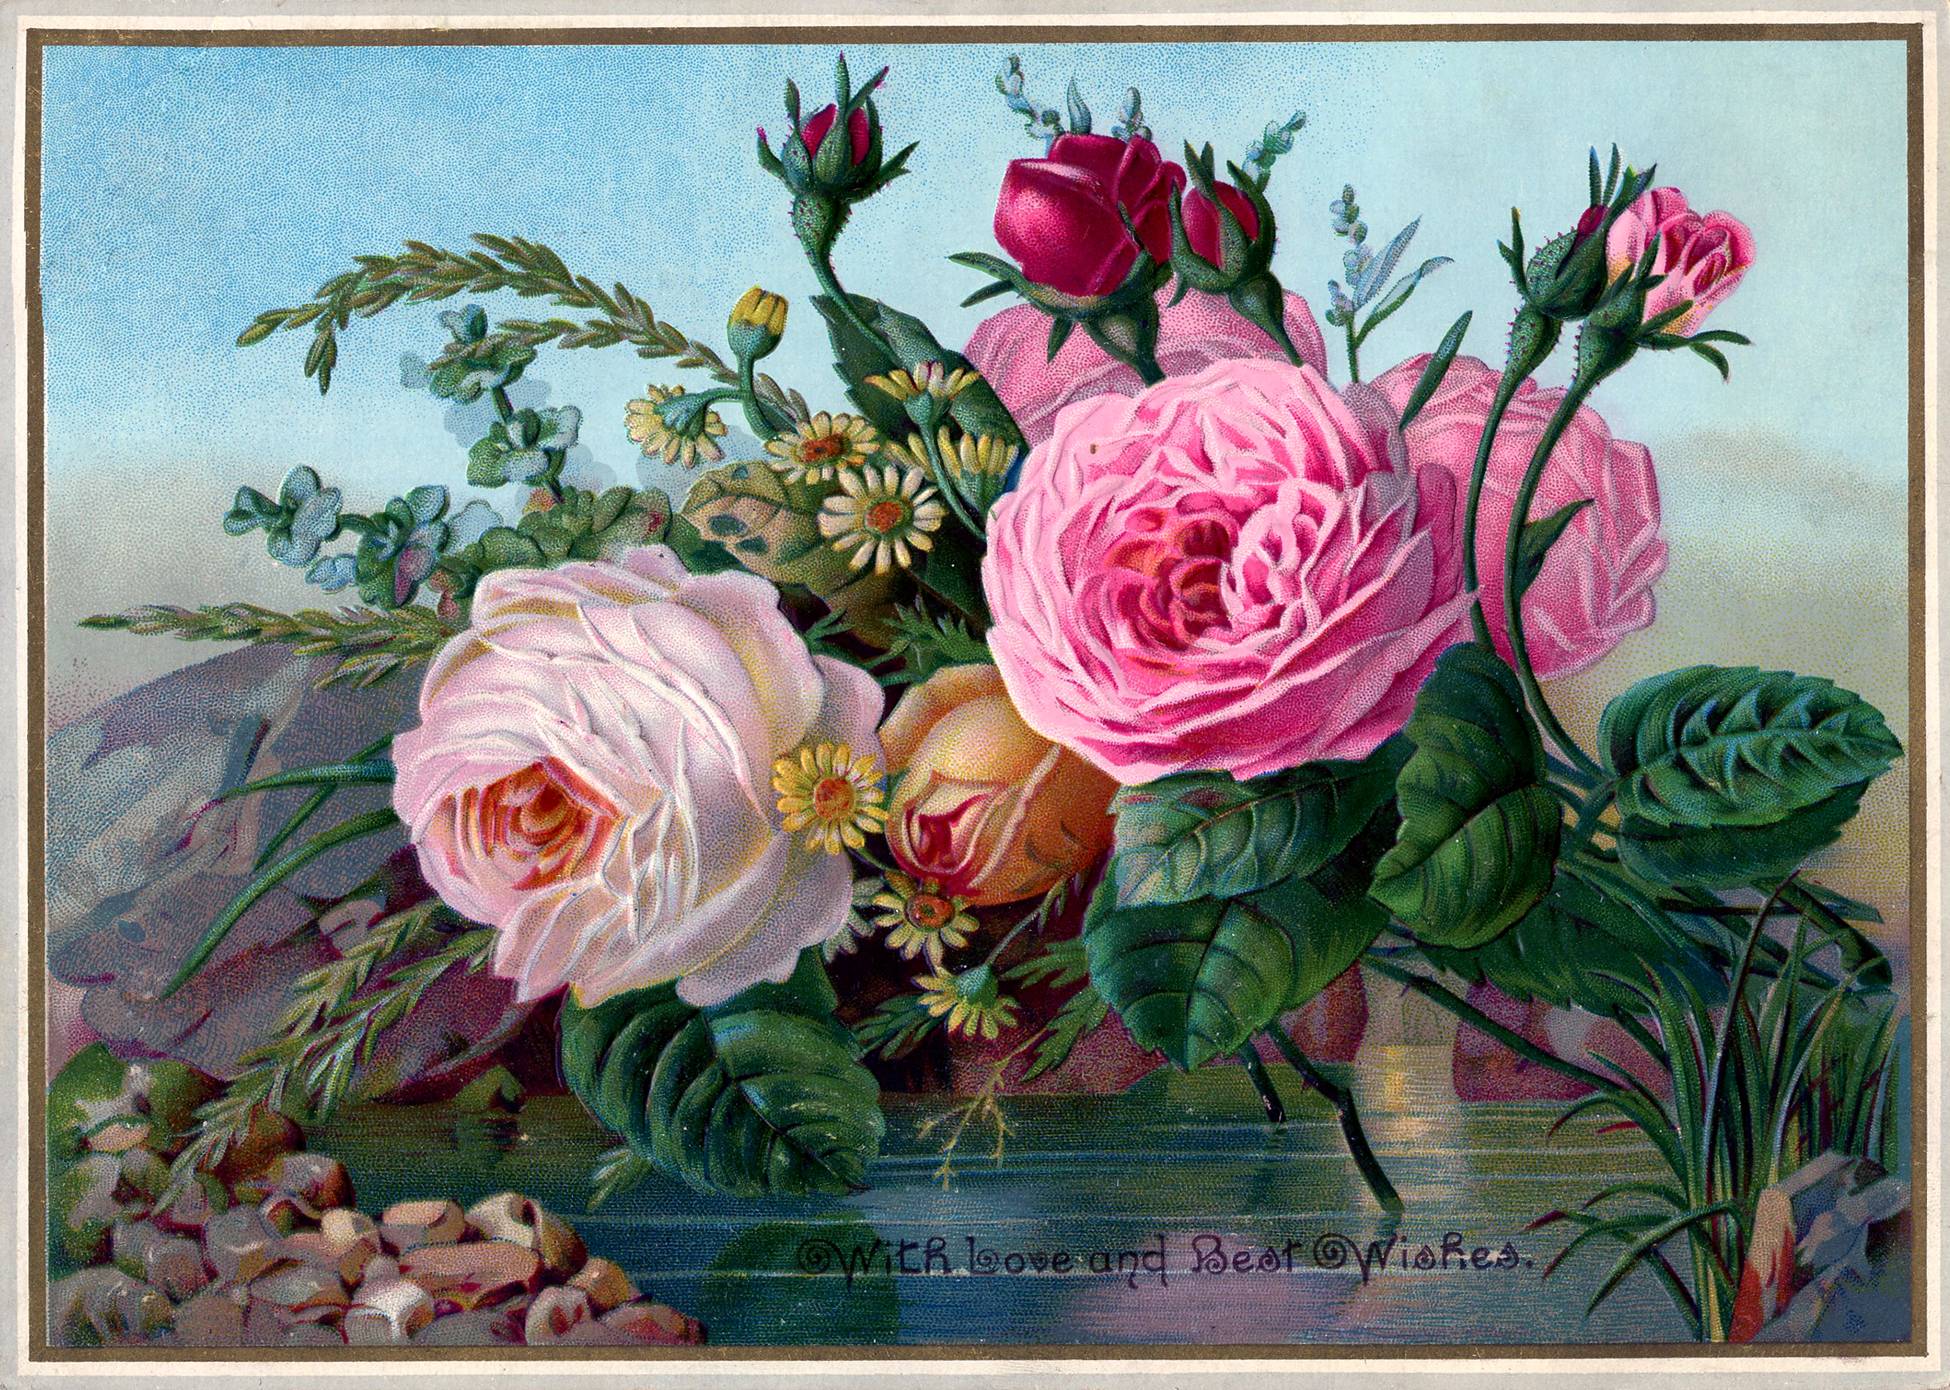 Free Public Domain Vintage Image - Stunning Roses - The Graphics